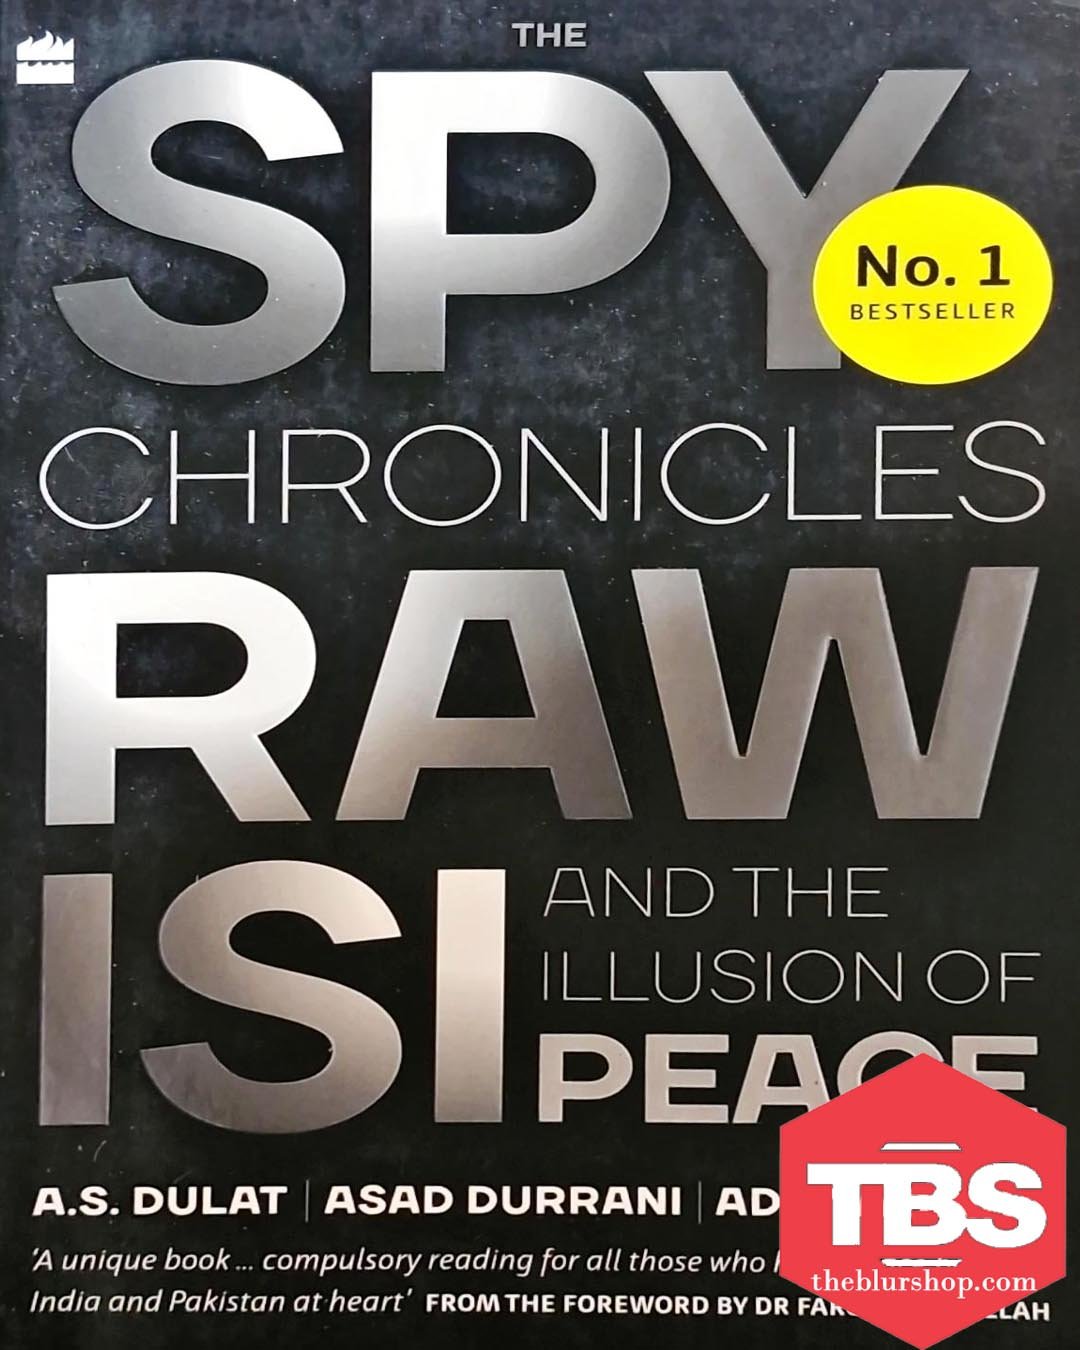 The Spy Chronicles: RAW, ISI And The Illusion of Peace